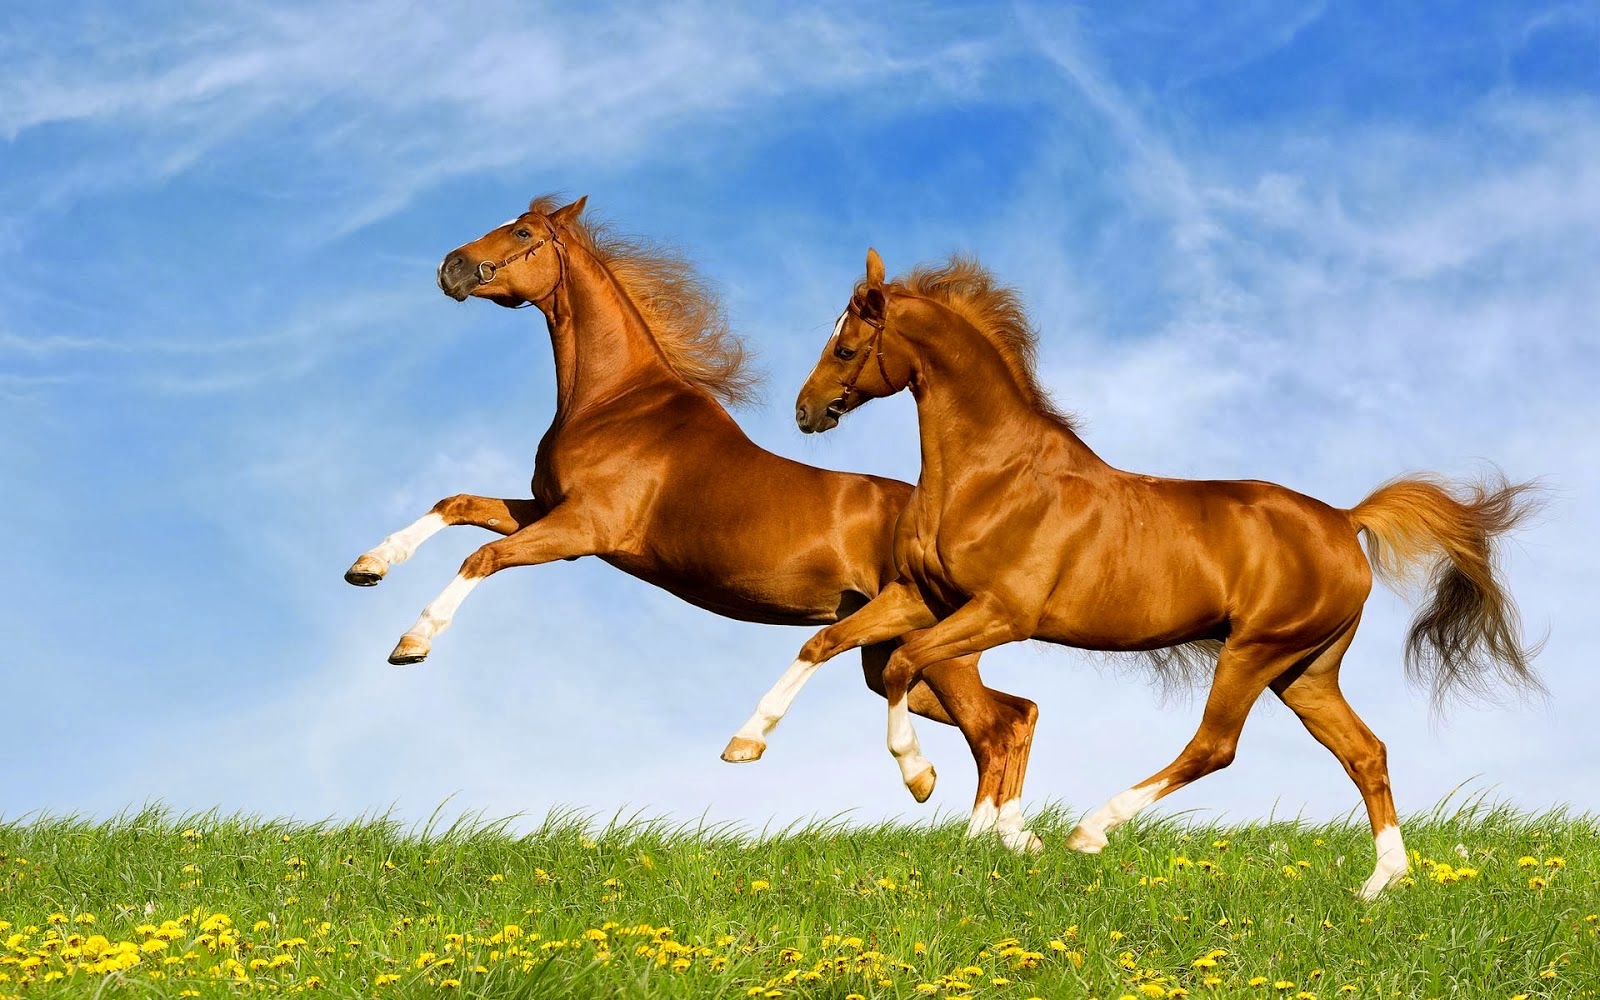 horses playing